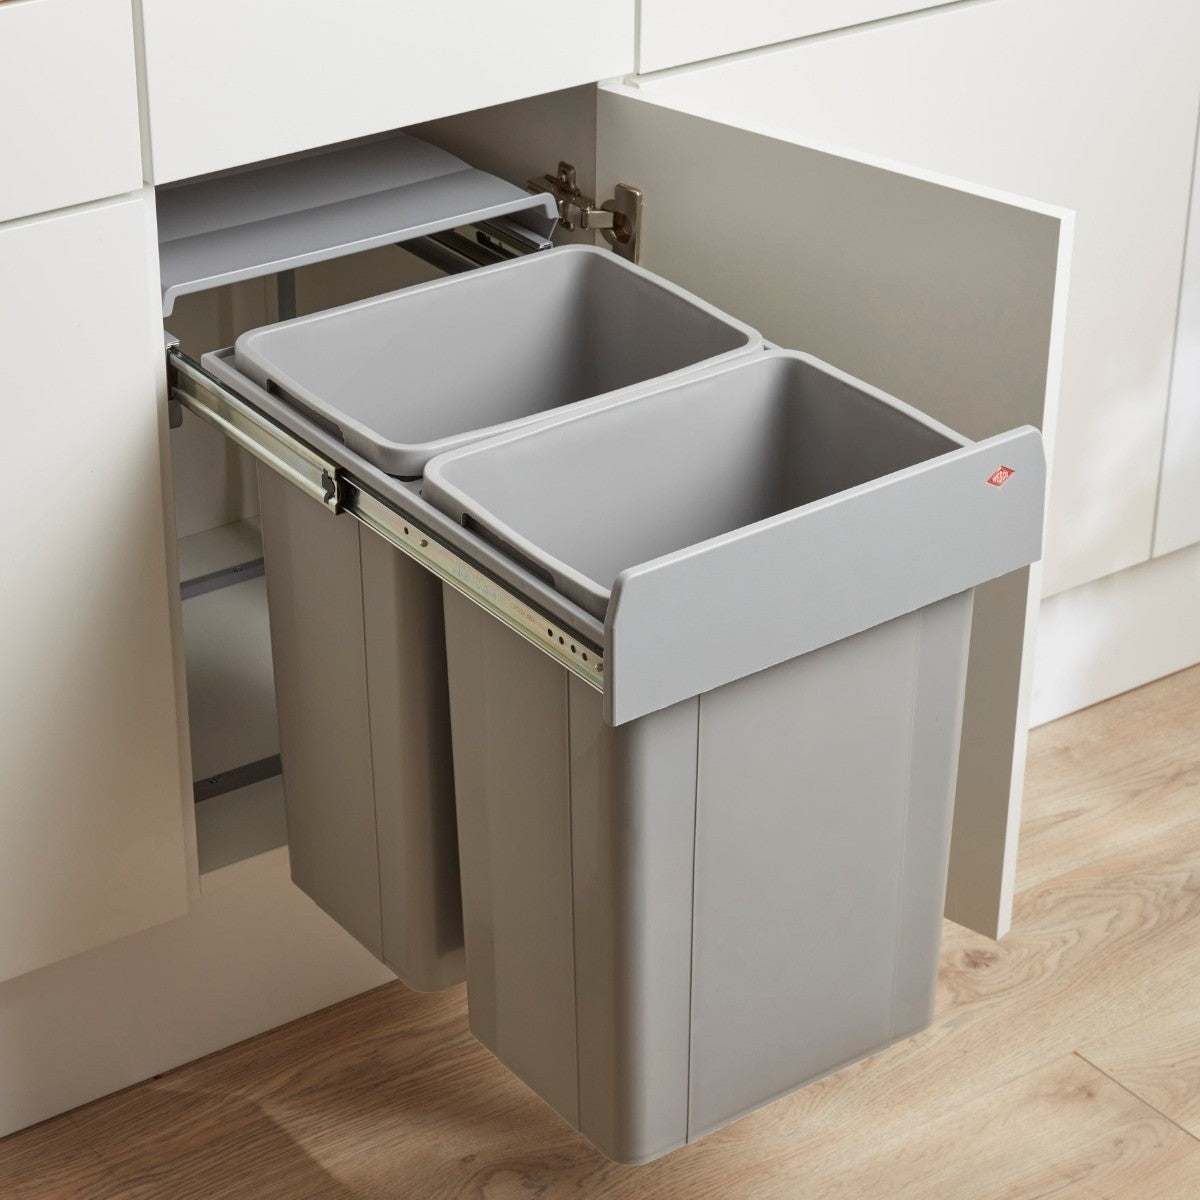 Wesco Big Bio Double 52L 2-Compartment kitchen Recycling bin for 600mm Hinged Door kitchen Cabinets